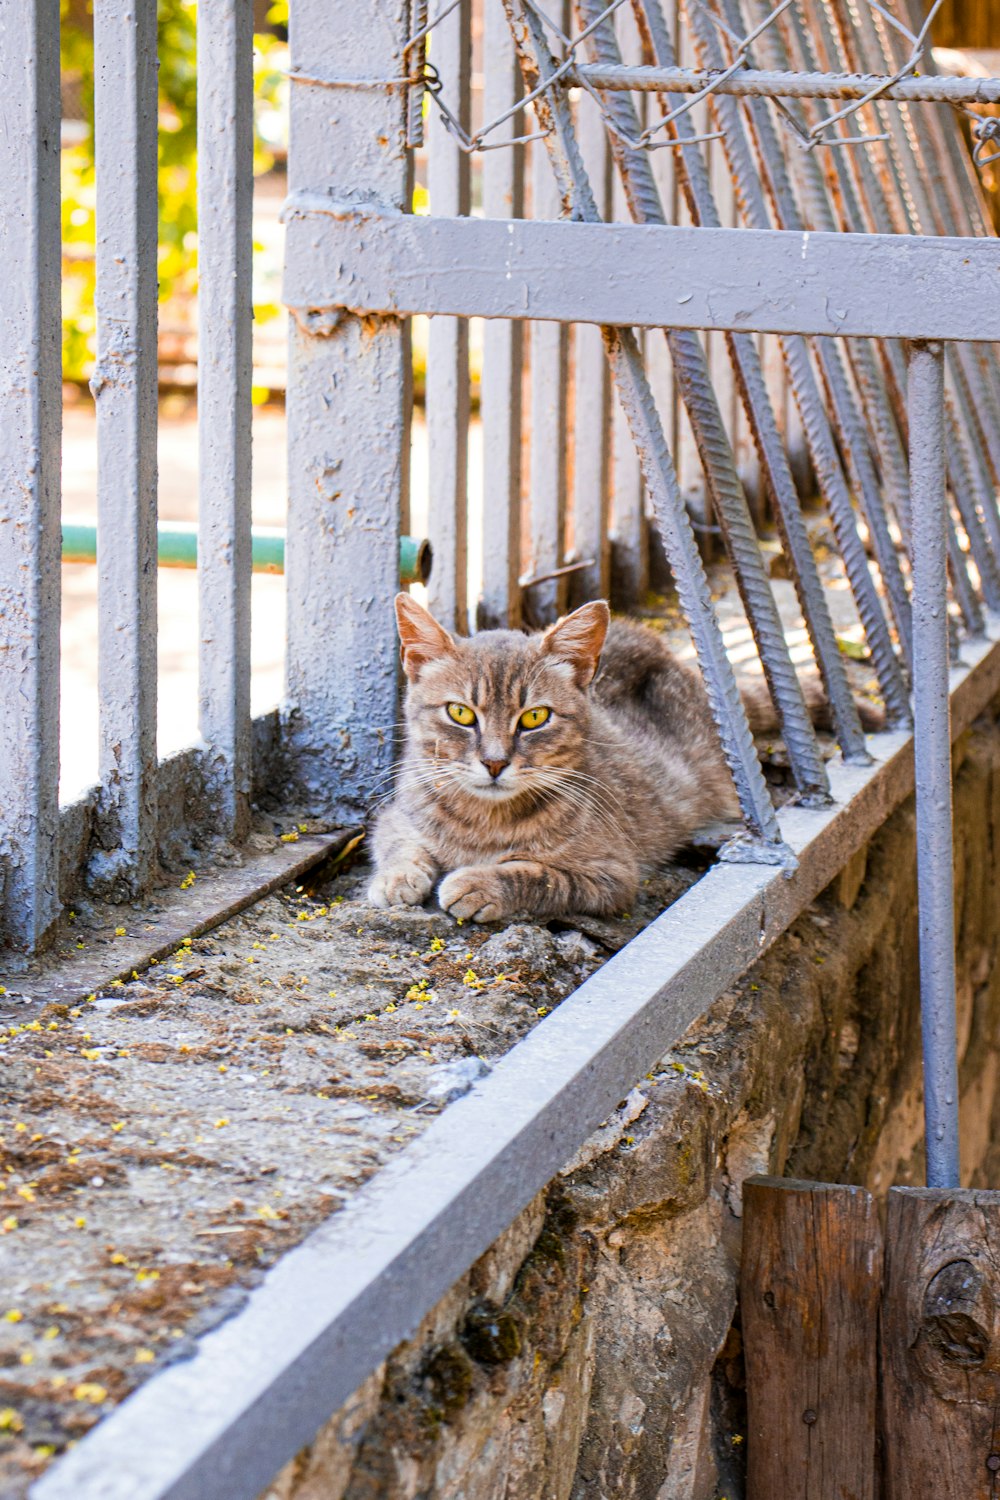 a cat sitting on a wooden bench